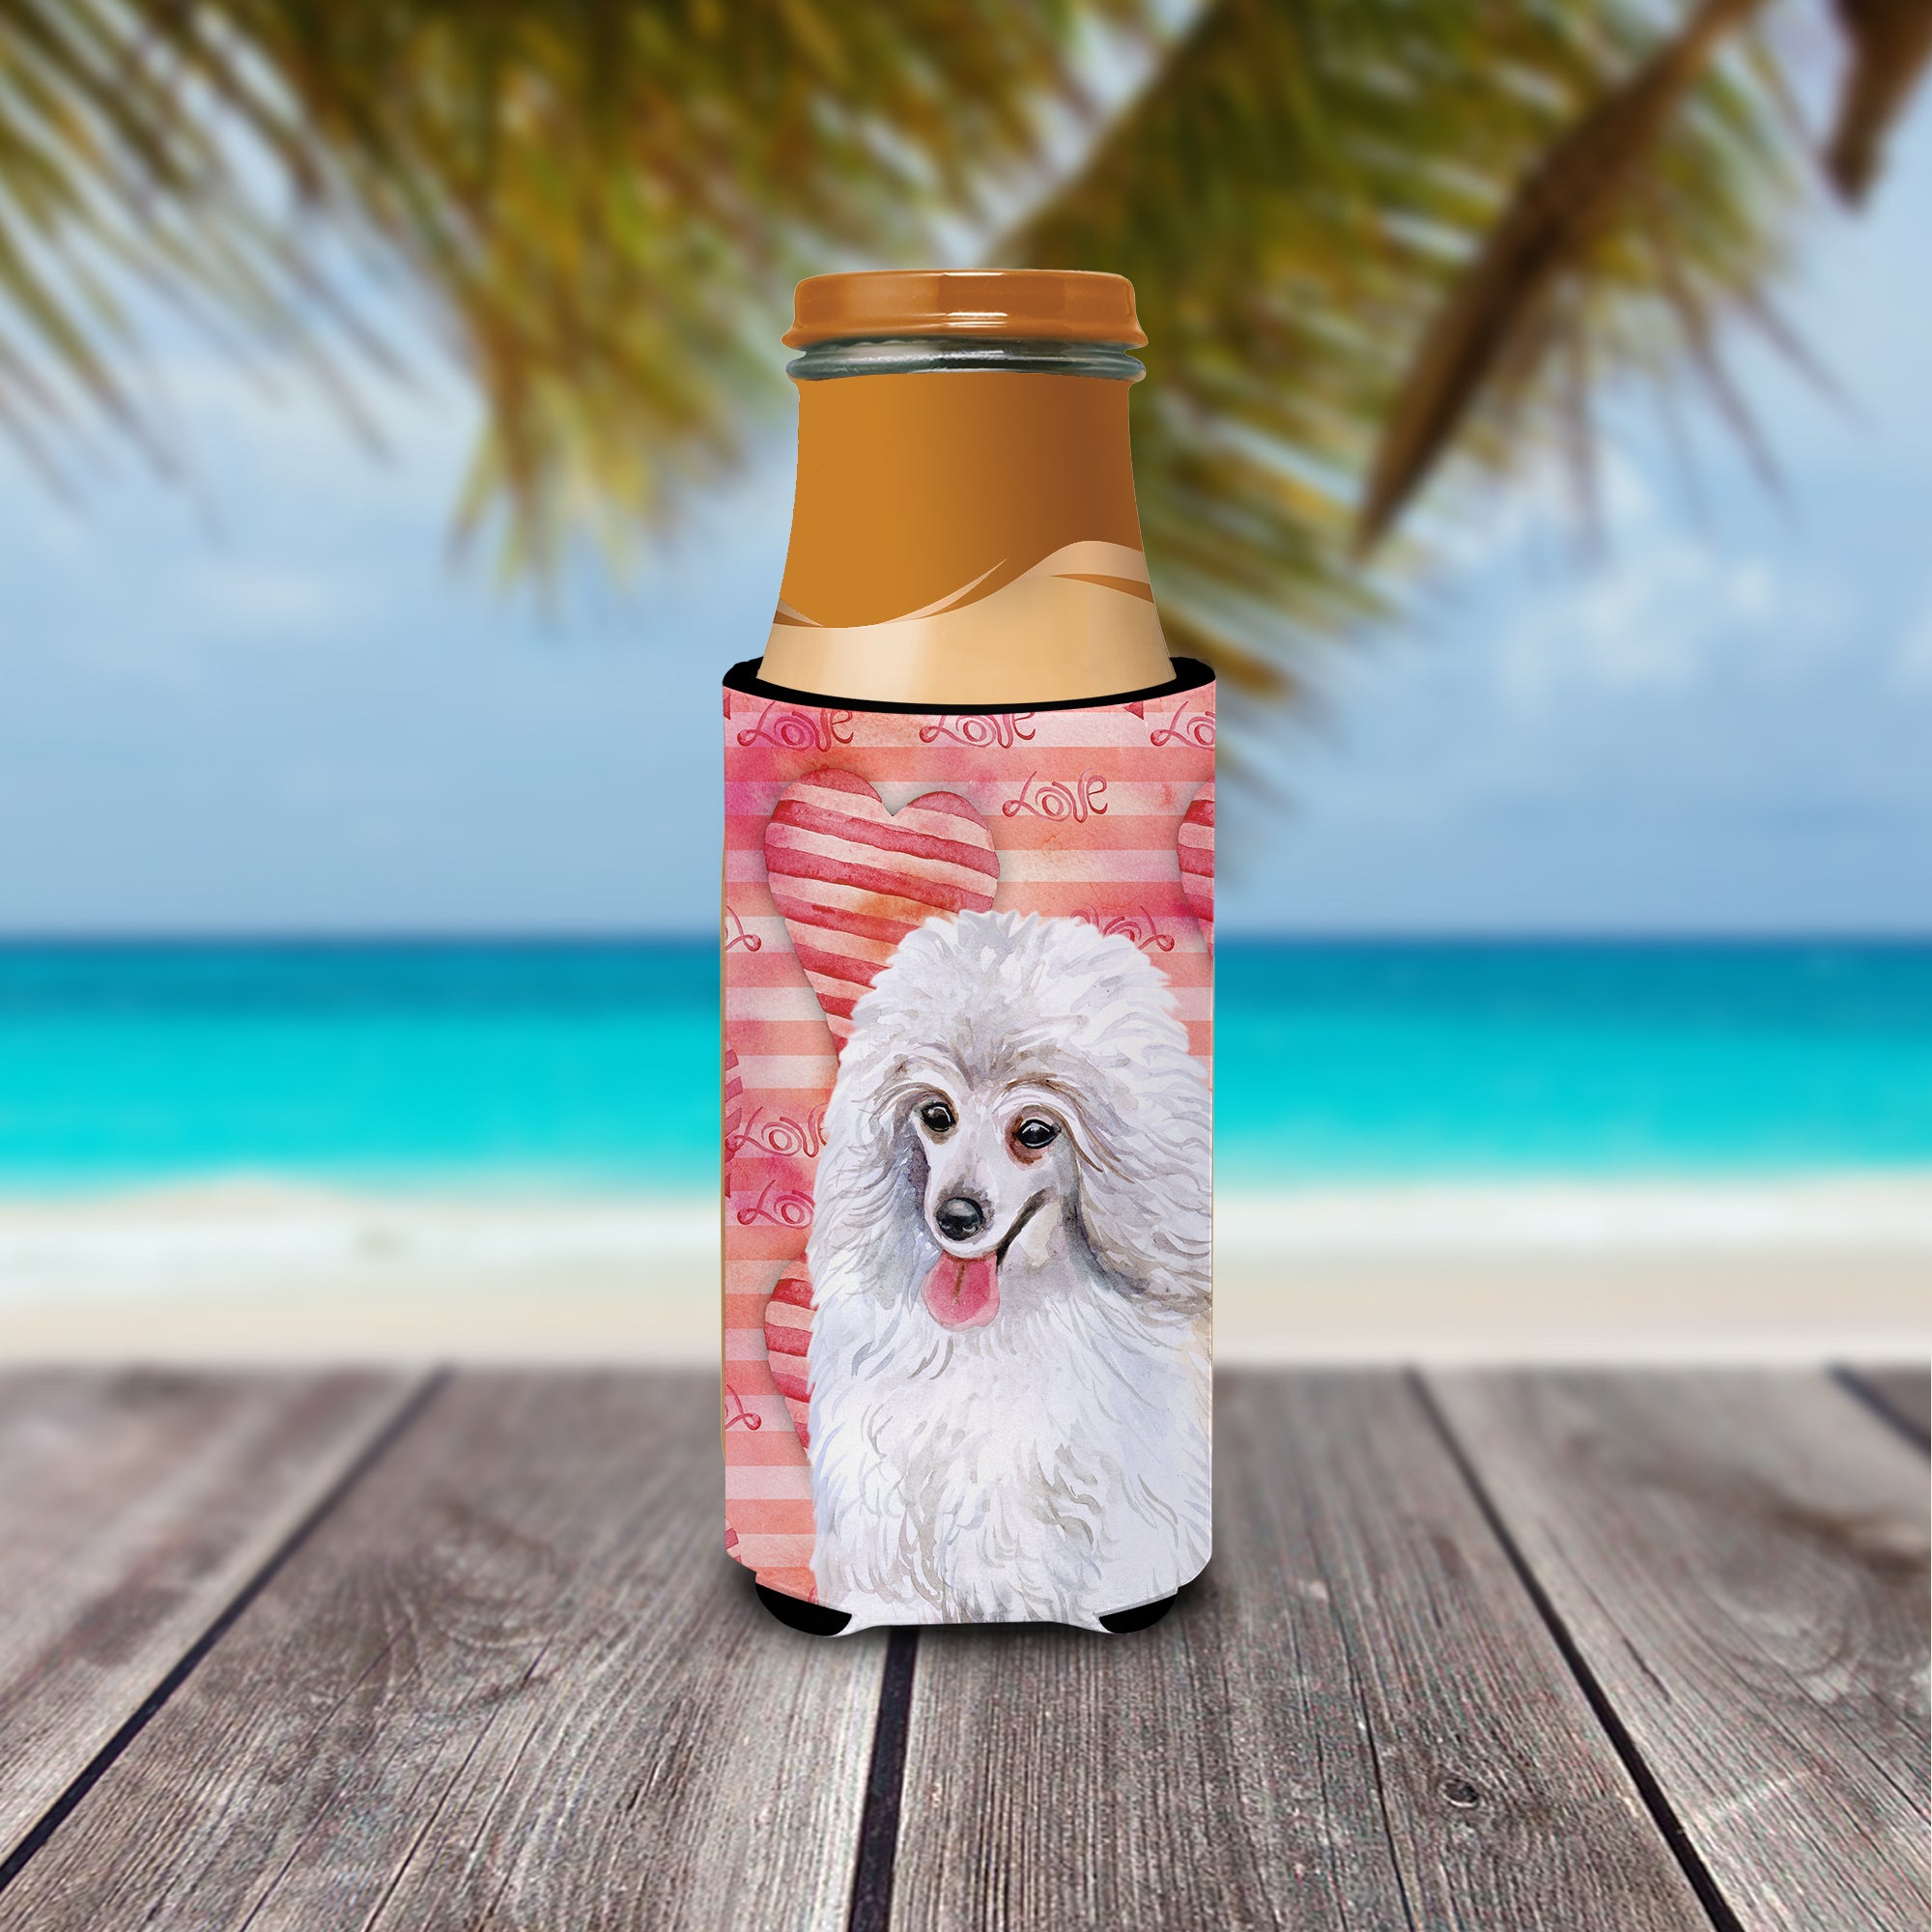 Medium White Poodle Love  Ultra Hugger for slim cans BB9770MUK  the-store.com.